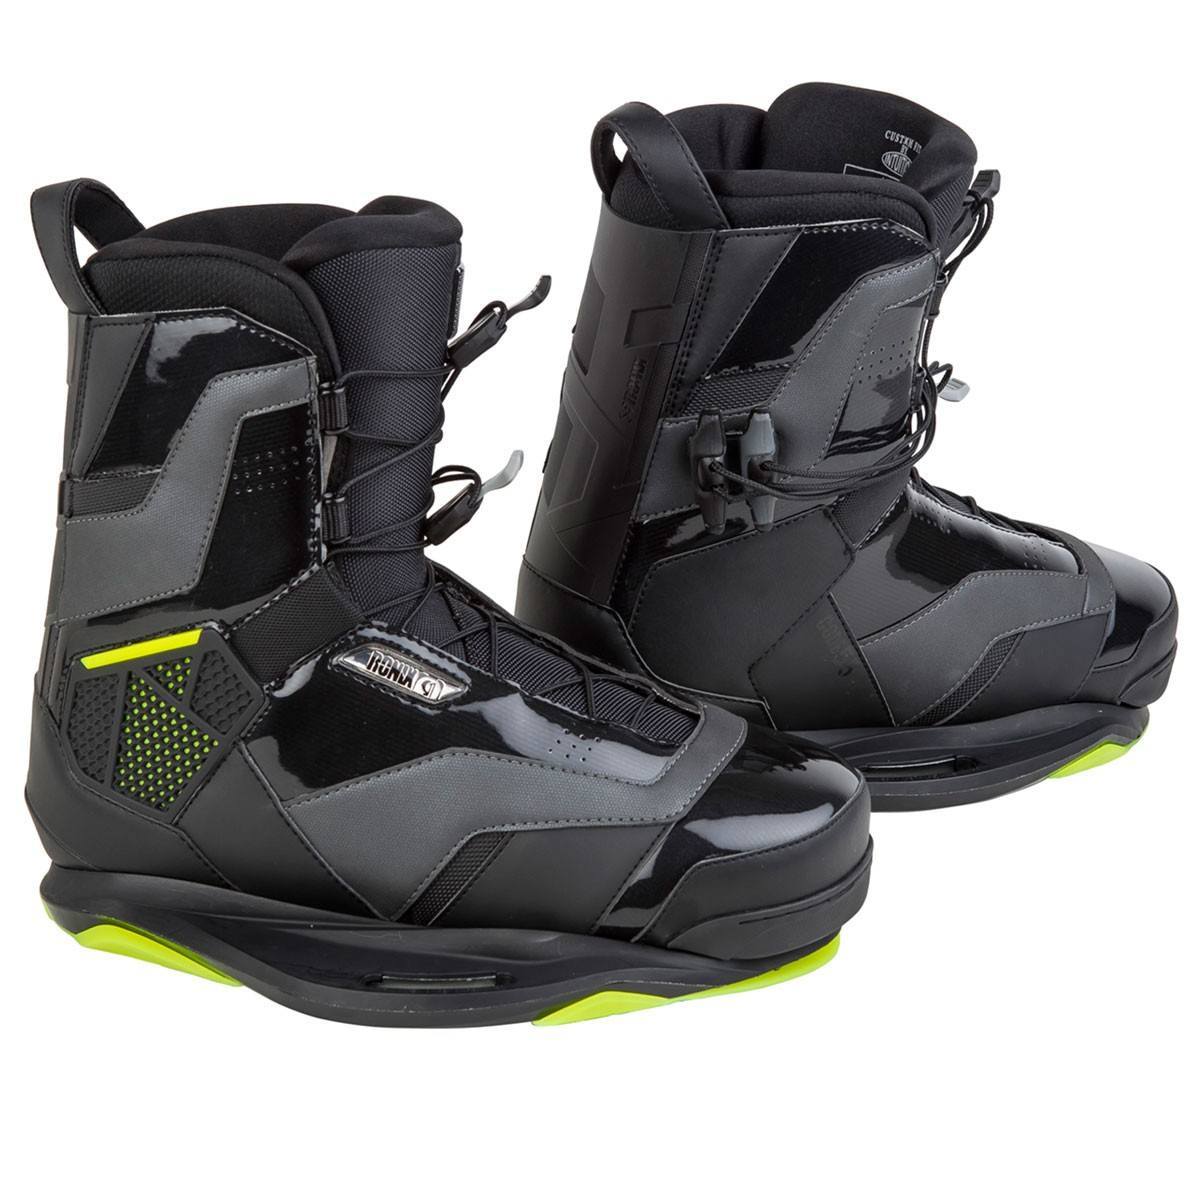 2015-ronix-boots-code55-02